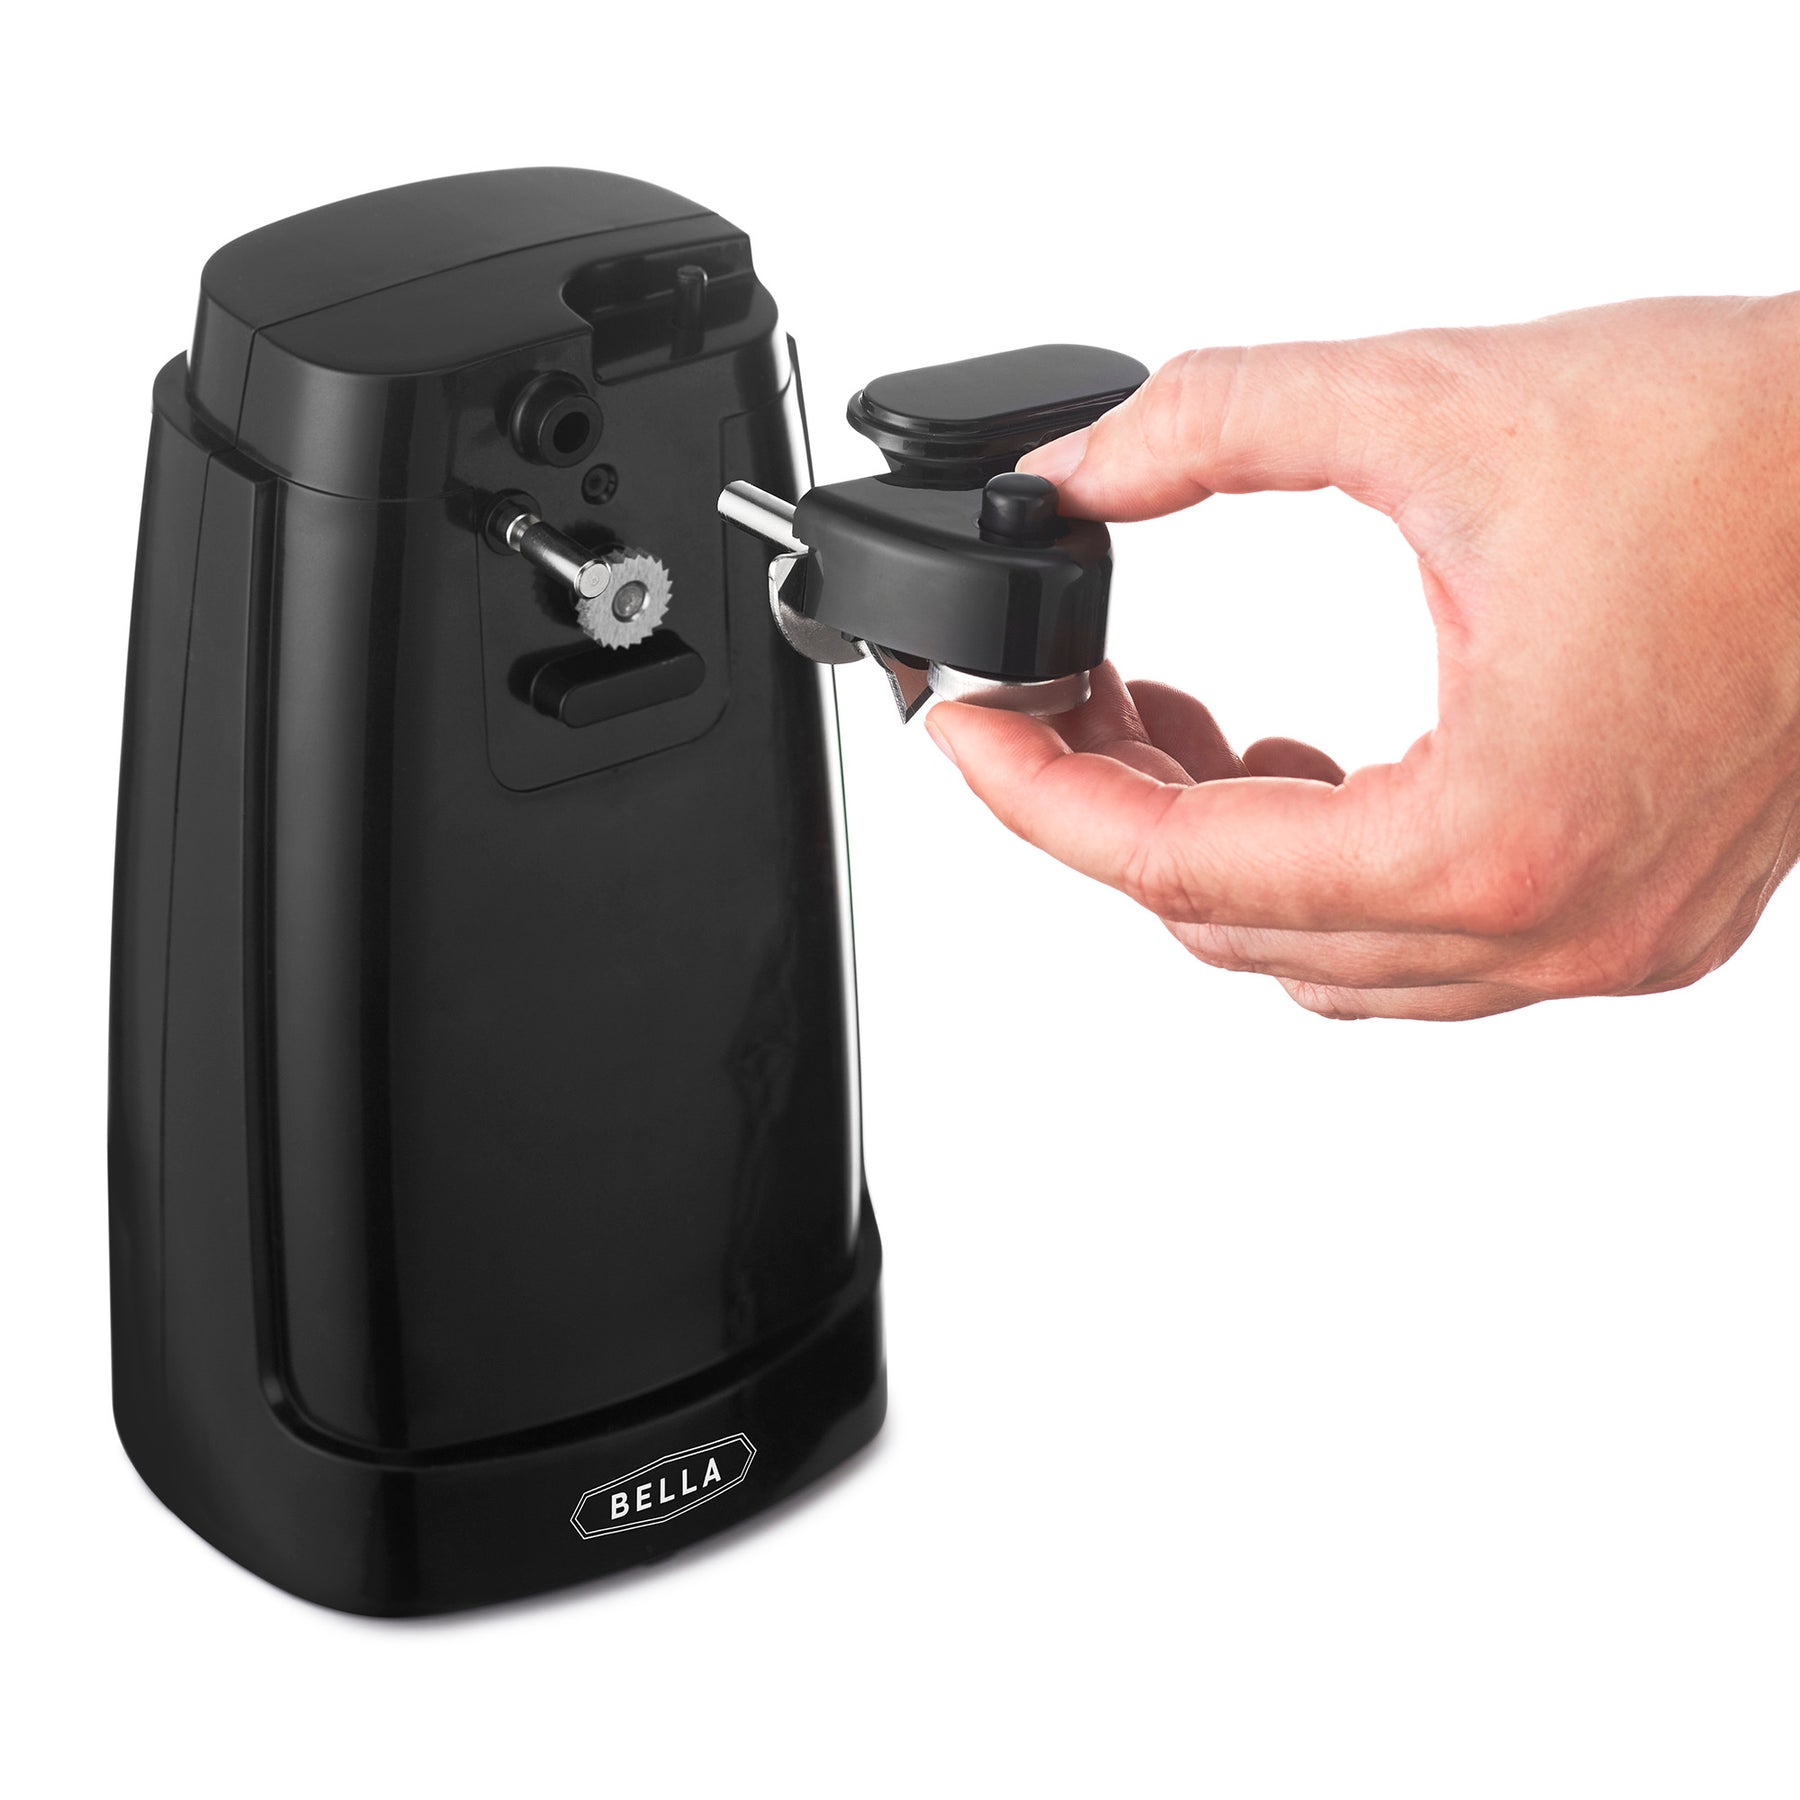 User manual Bella Electric Can Opener (English - 16 pages)